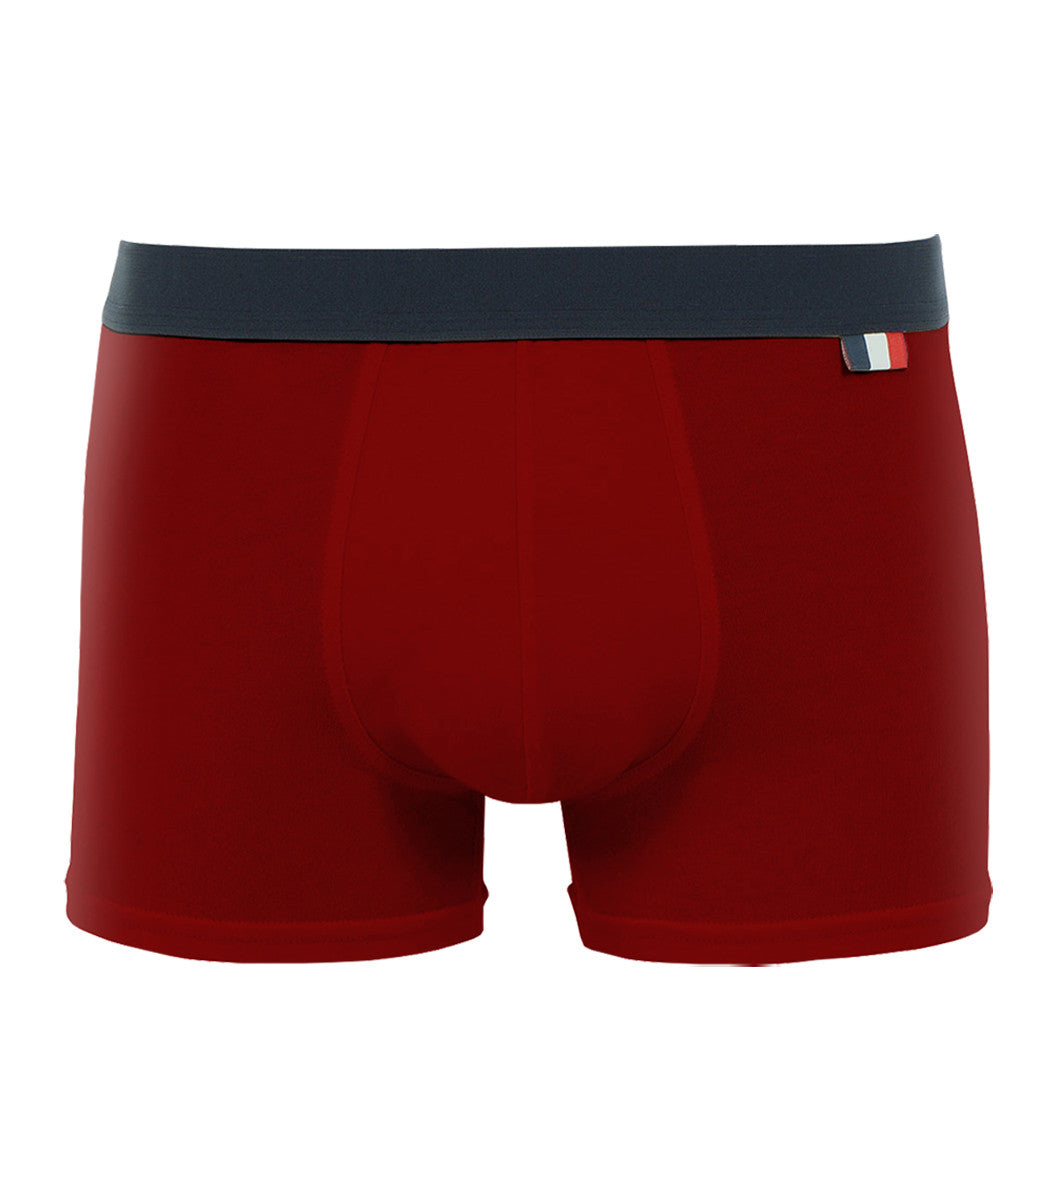 Boxer Homme x2 - Pack Duo